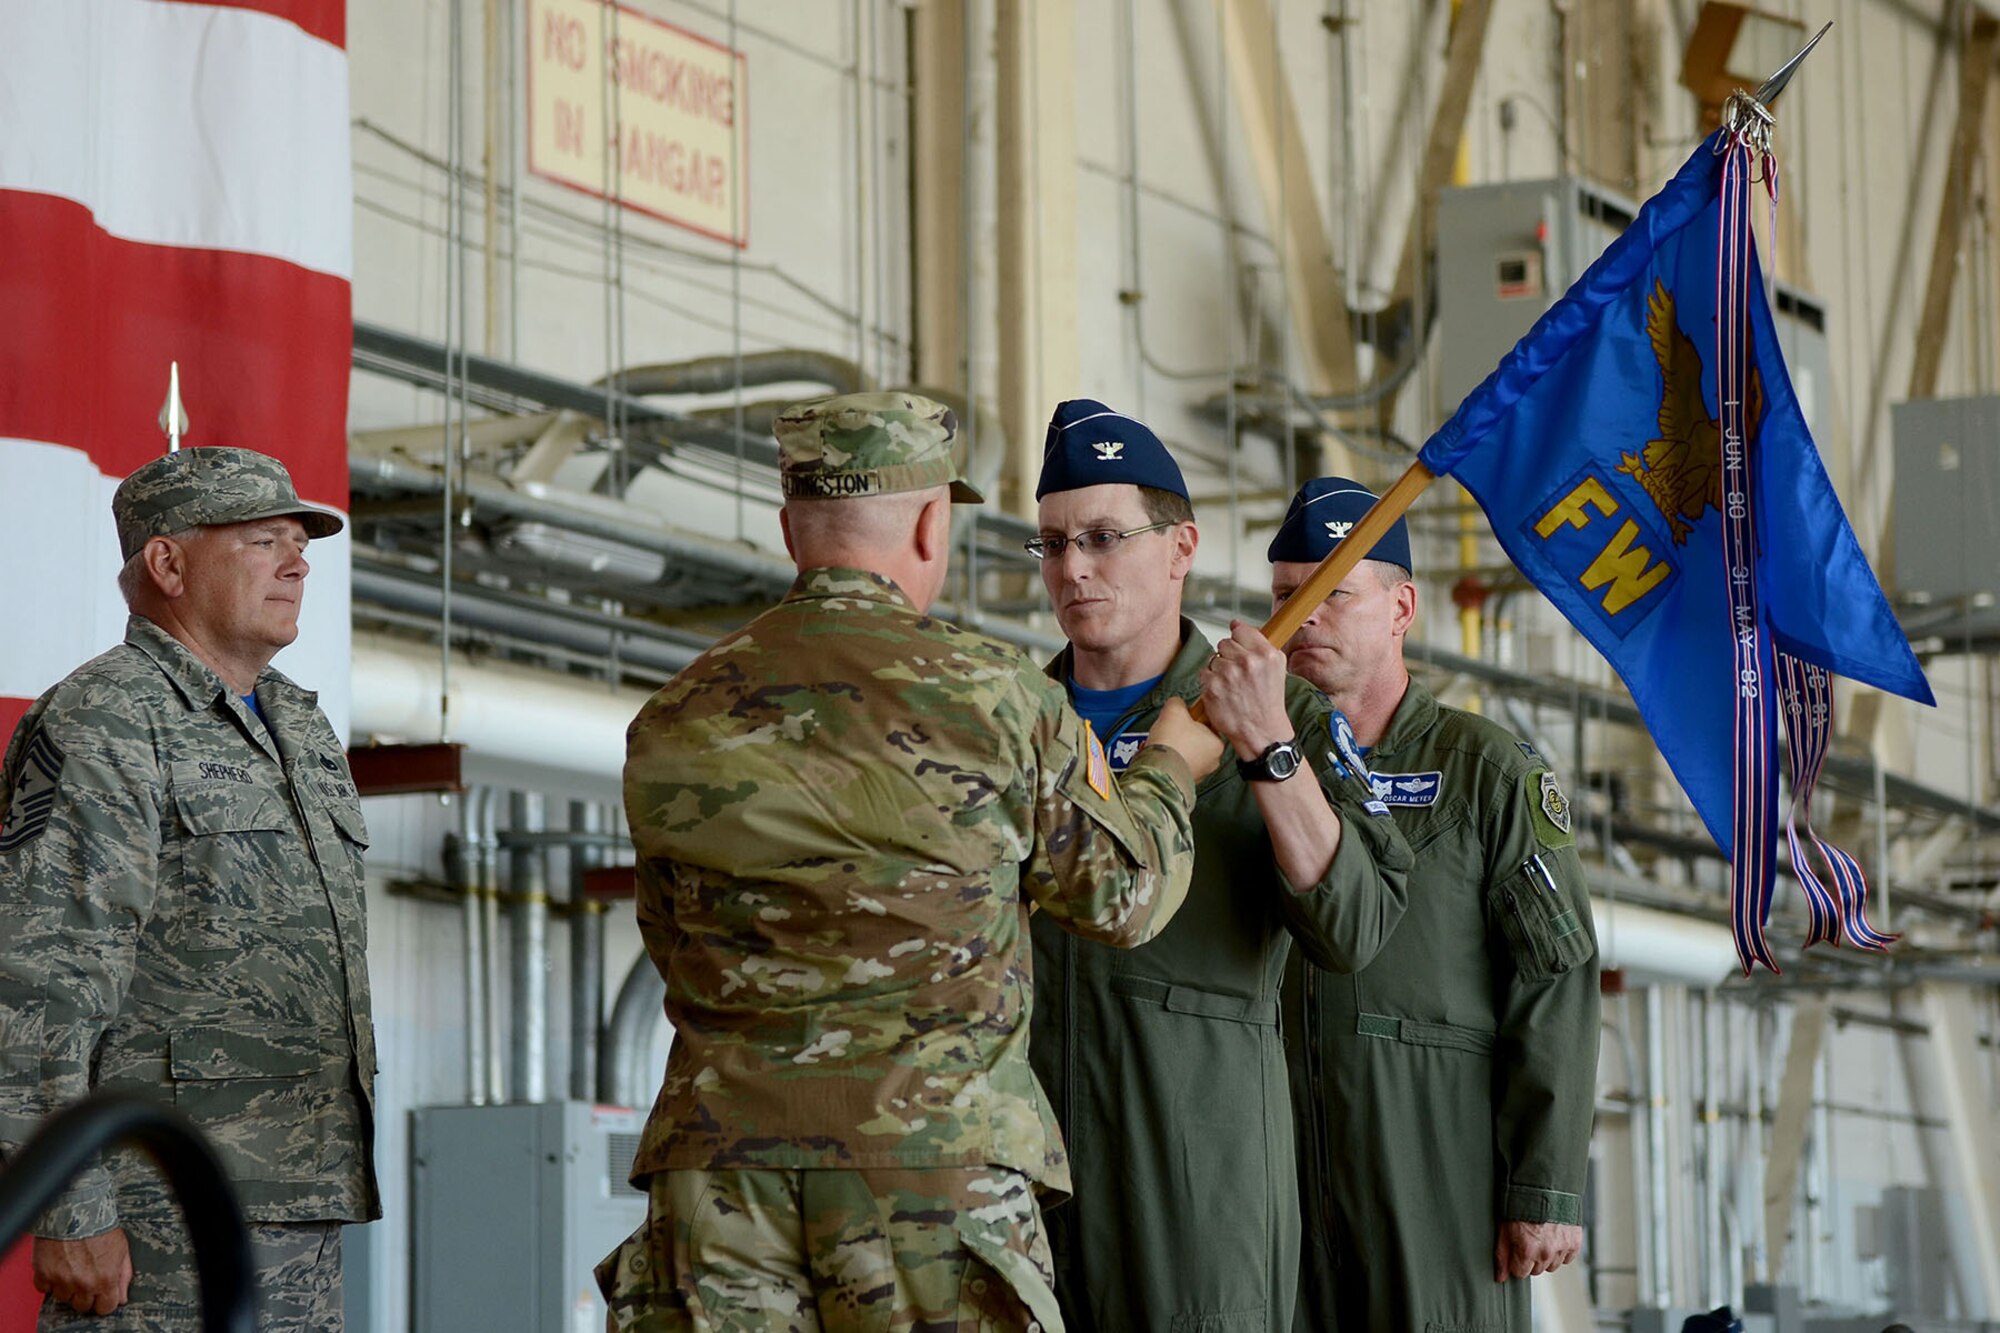 U.S. Airmen of the 169th Fighter Wing and the South Carolina Air National Guard, assemble for a change of command ceremony at McEntire Joint National Guard Base, S.C., May 14, 2016. Col. David Meyer relinquishes command of the 169th Fighter Wing to Col. Nicholas Gentile. (U.S. Air National Guard photo by Senior Airman Ashleigh S. Pavelek)